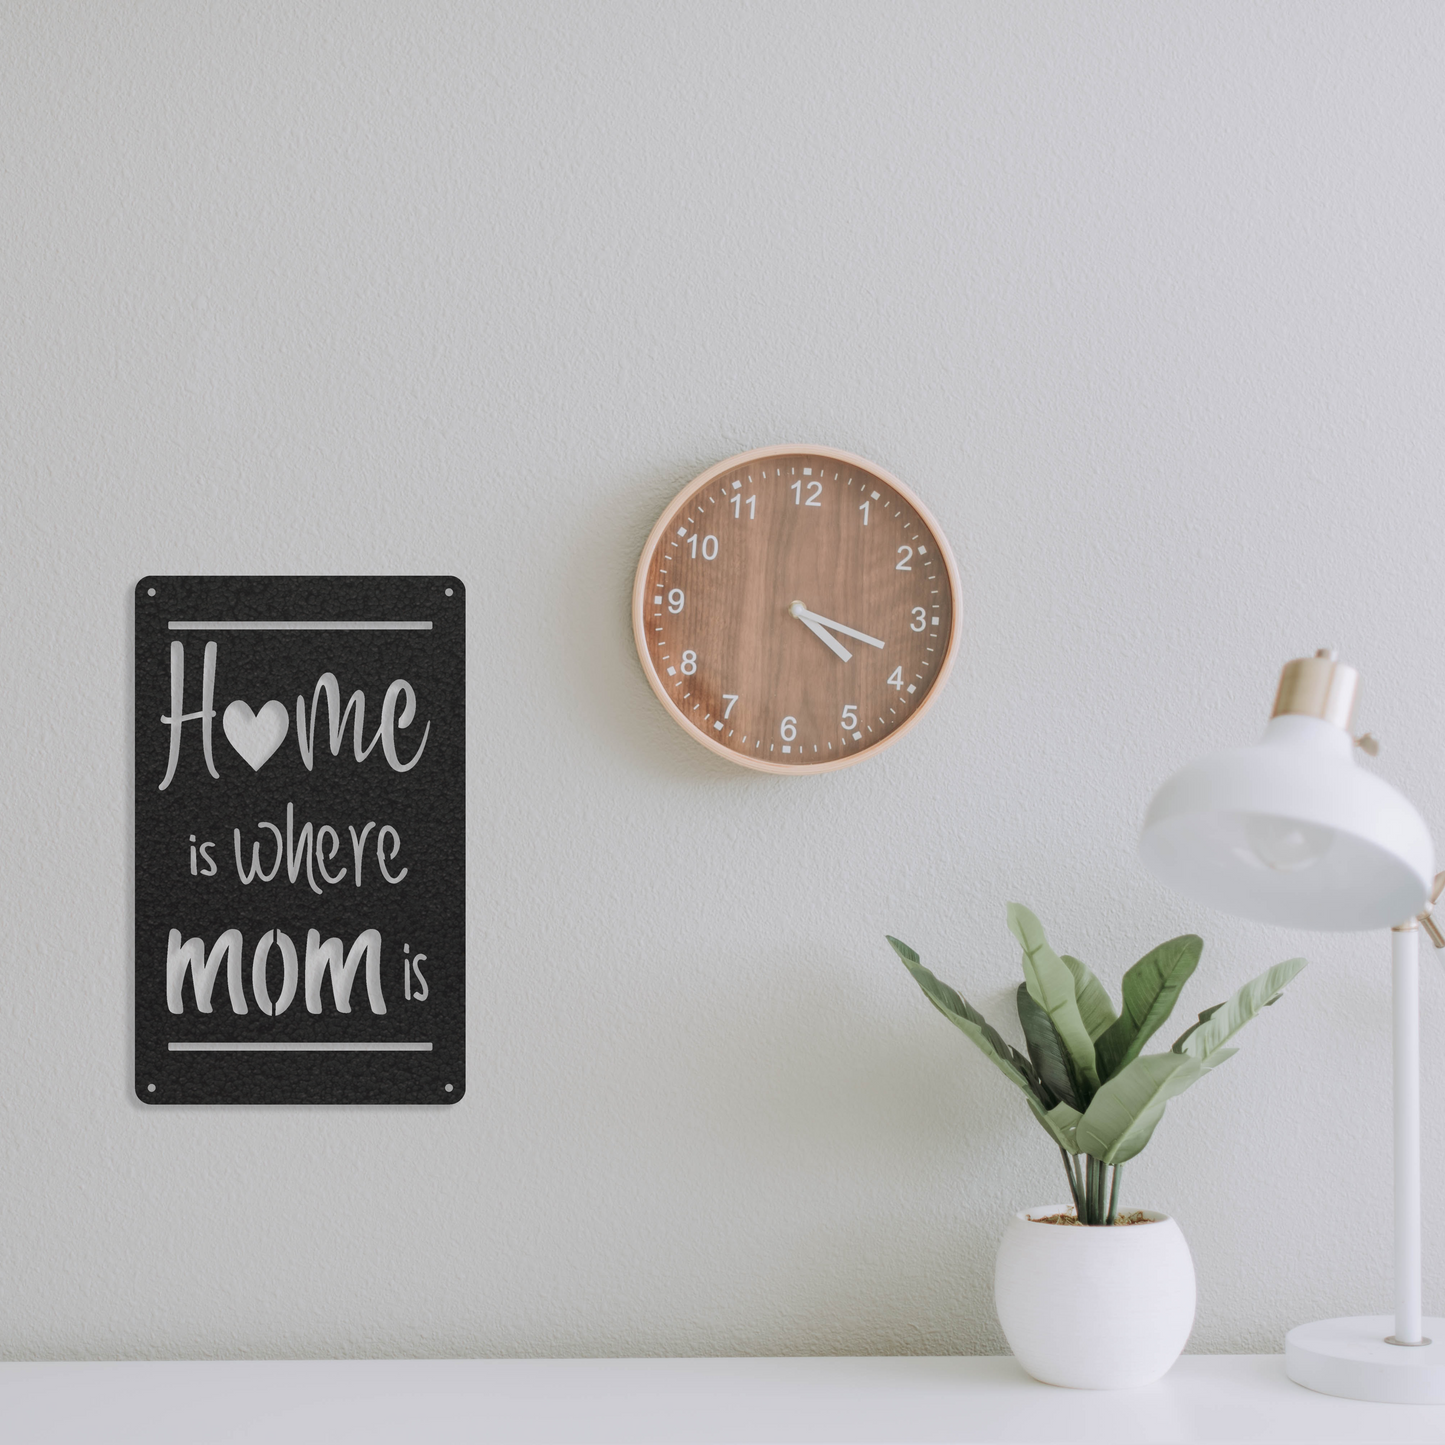 Home Is Where Mom Is - Metal Wall Art